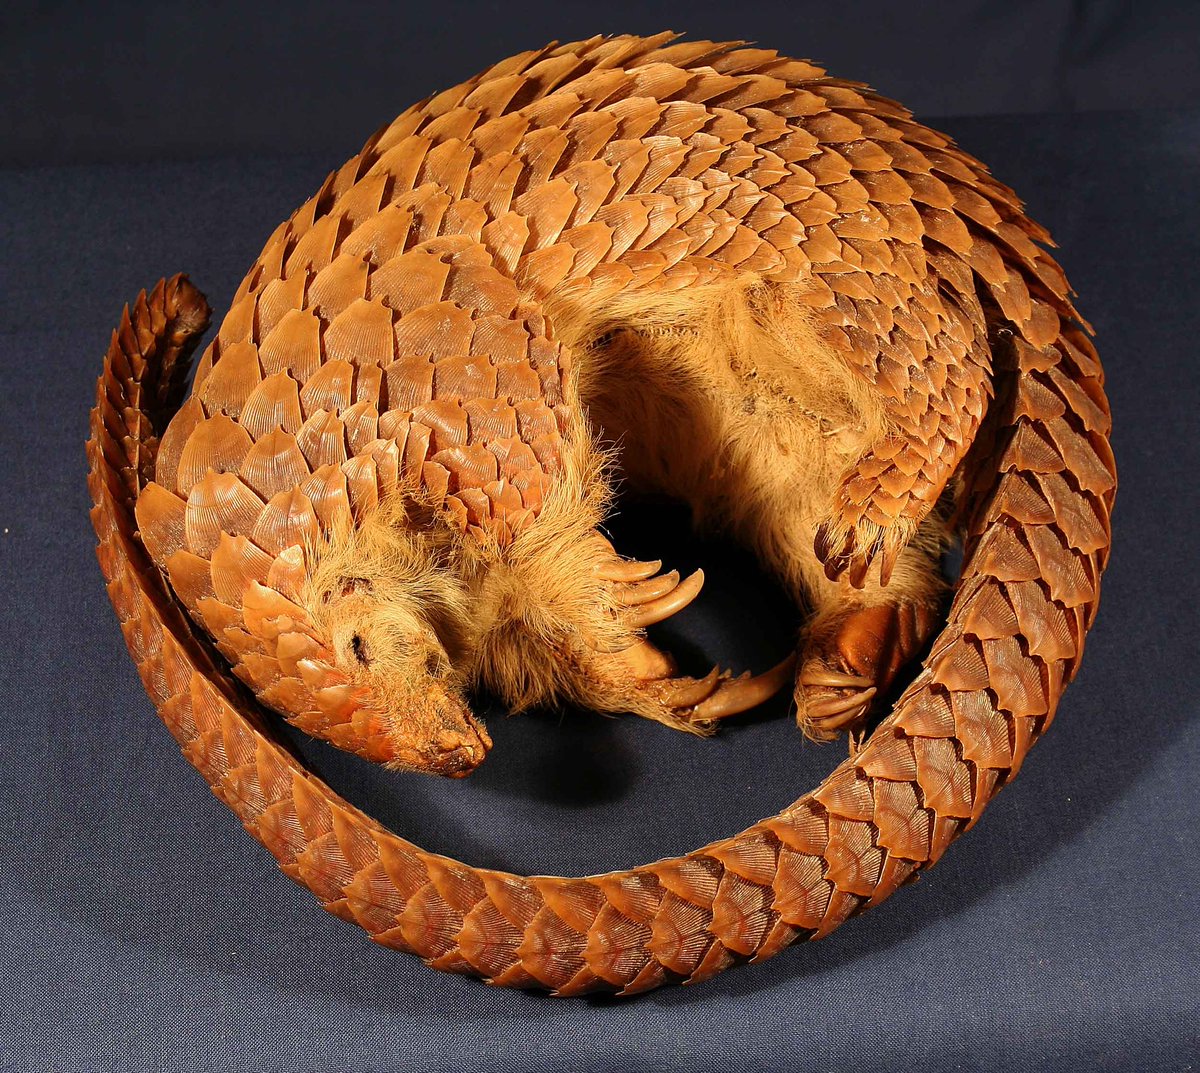 Many species are endangered through habitat loss, climate change etc. Our collections, which include endangered species such as the pangolin, help to highlight these issues and educate future generations #HeritageMW #NaturalHeritage